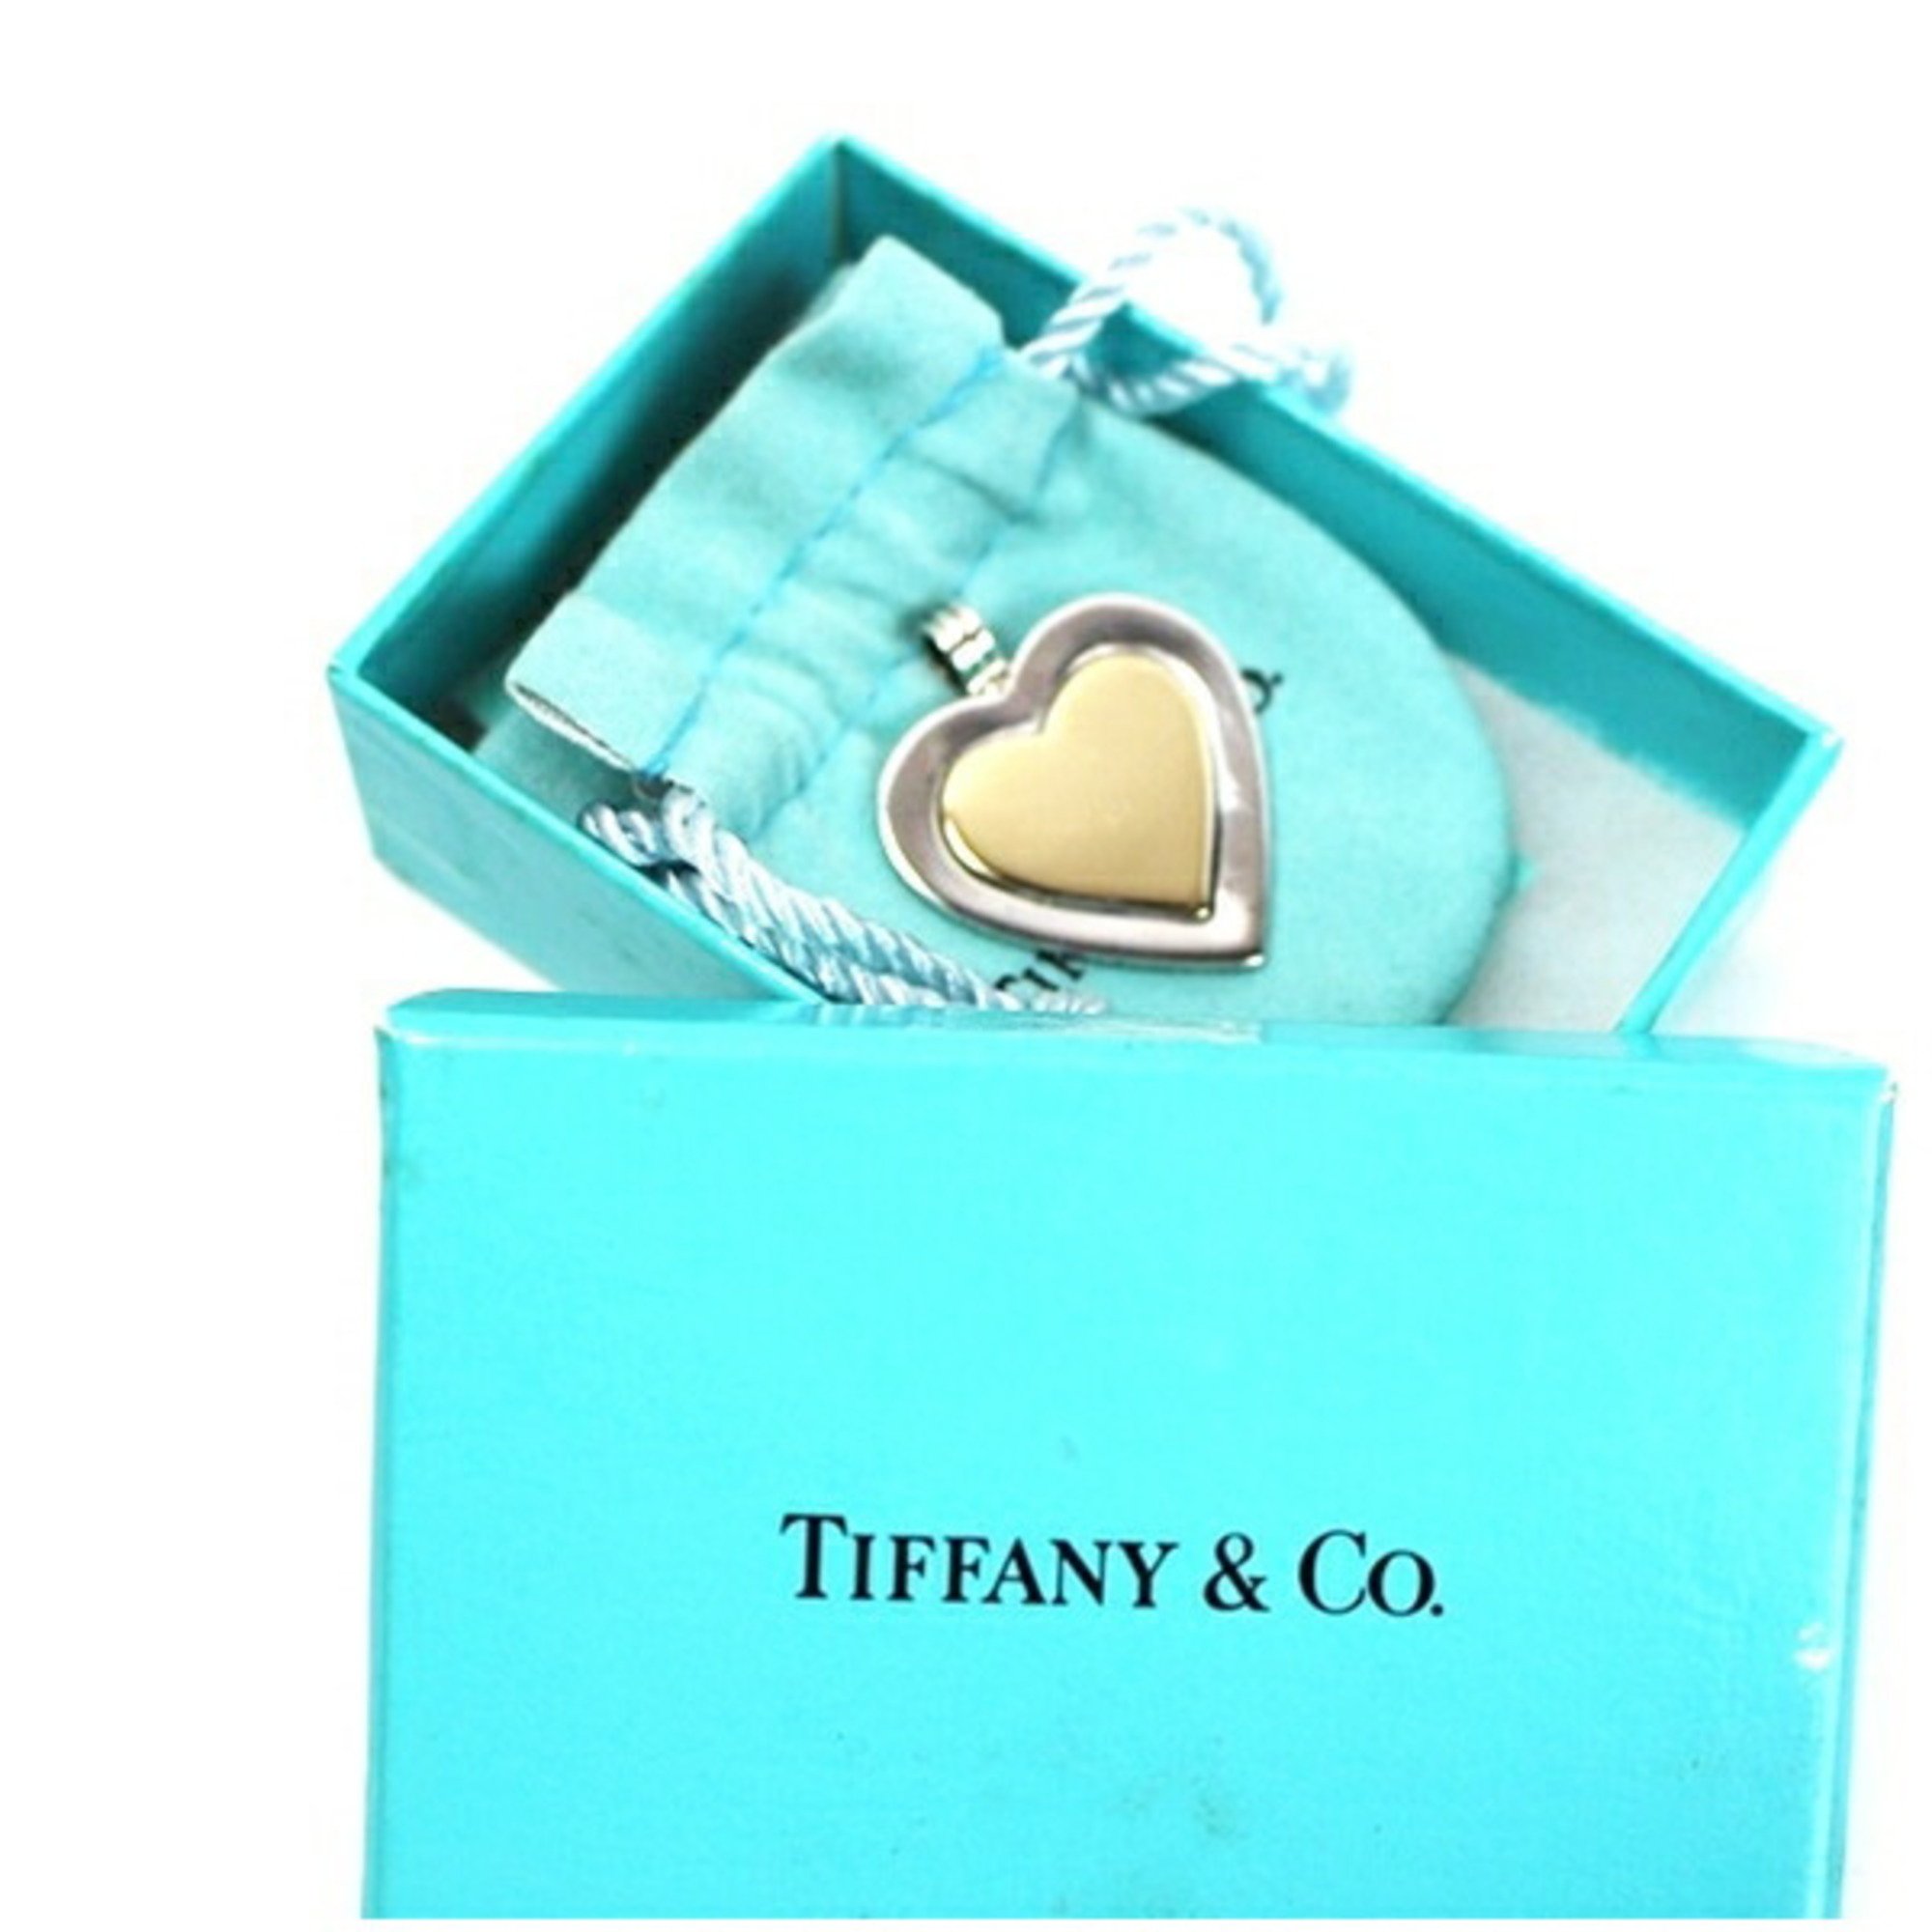 Tiffany heart pendant top, 925 silver, for TIFFANY&Co, ladies